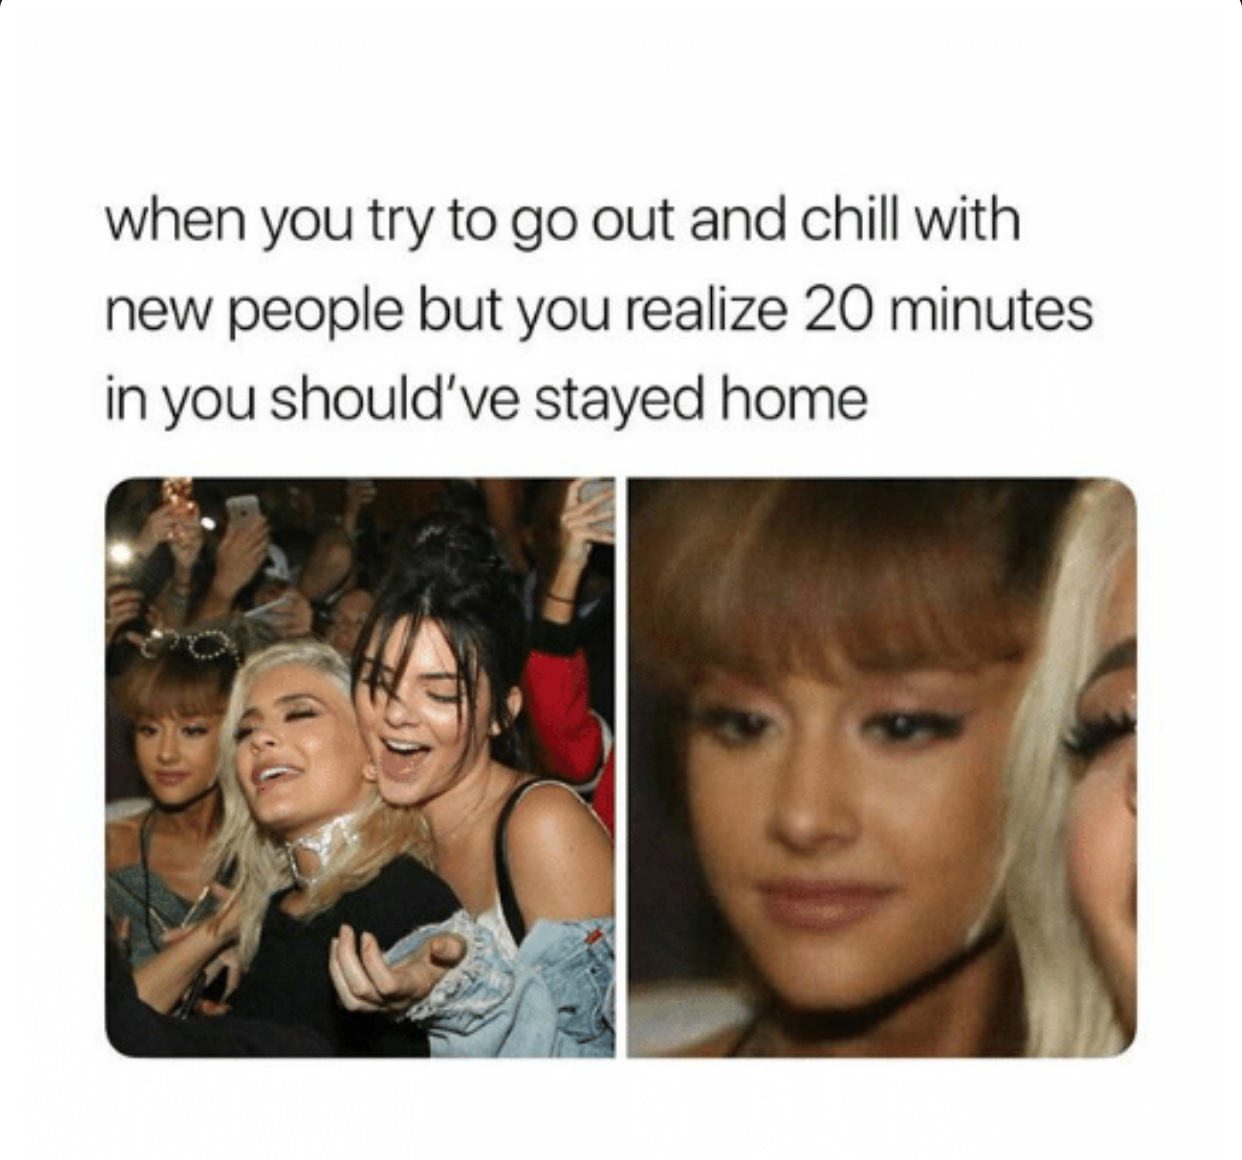 meme ariana grande - when you try to go out and chill with new people but you realize 20 minutes in you should've stayed home